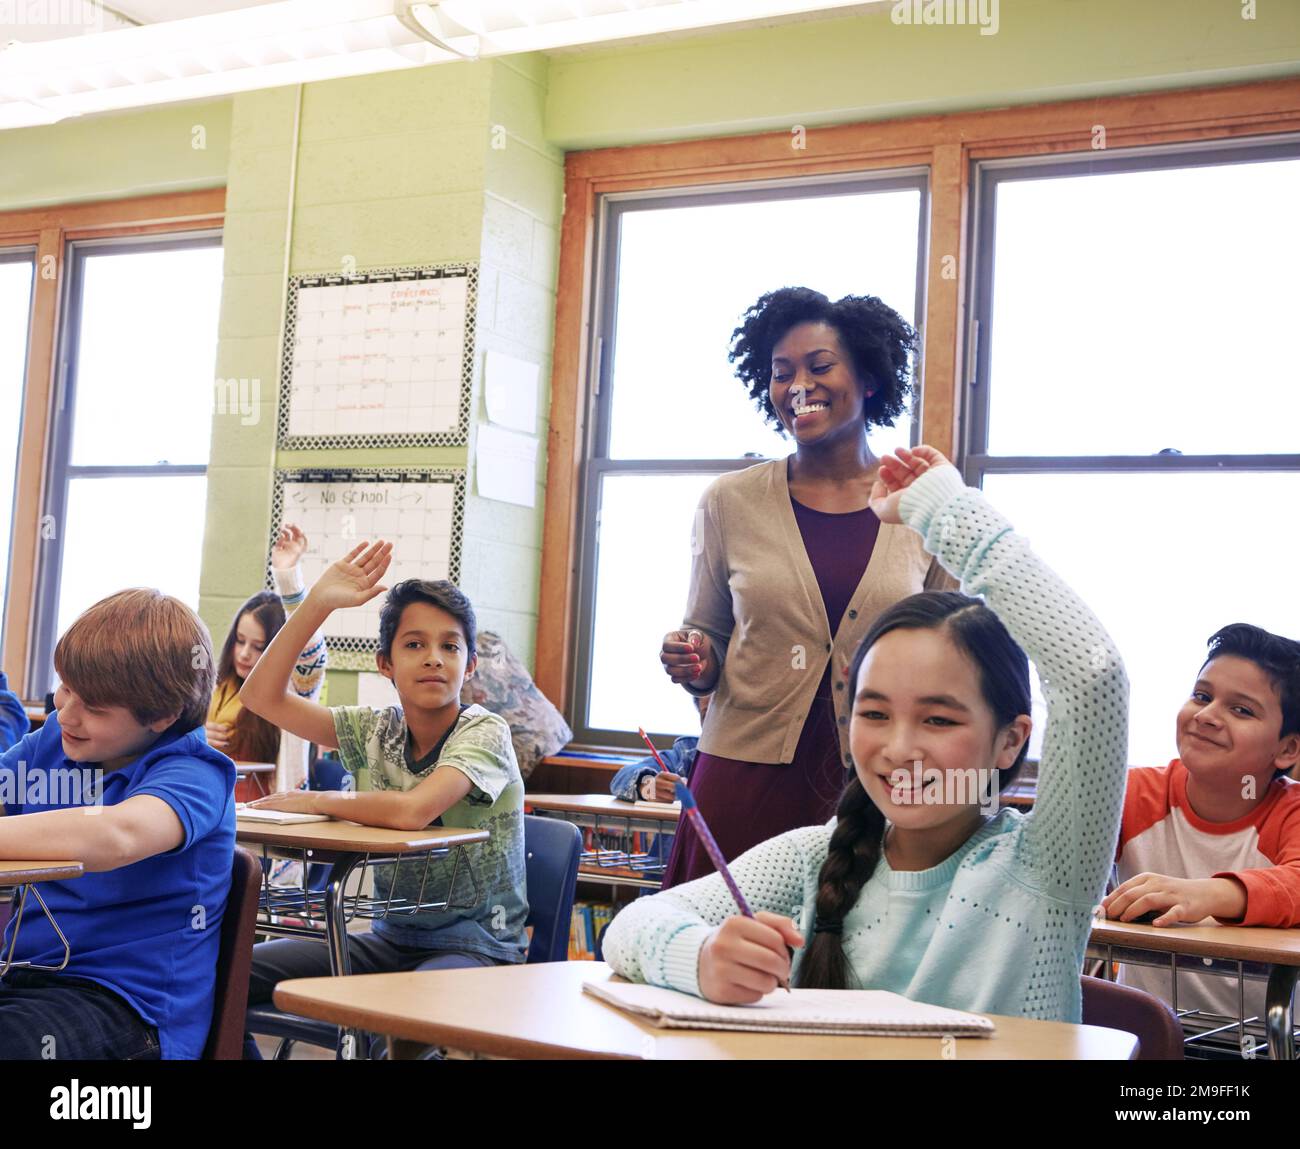 Education, teacher and kids raise their hands to ask or answer an academic question for learning. Diversity, school and primary school children Stock Photo